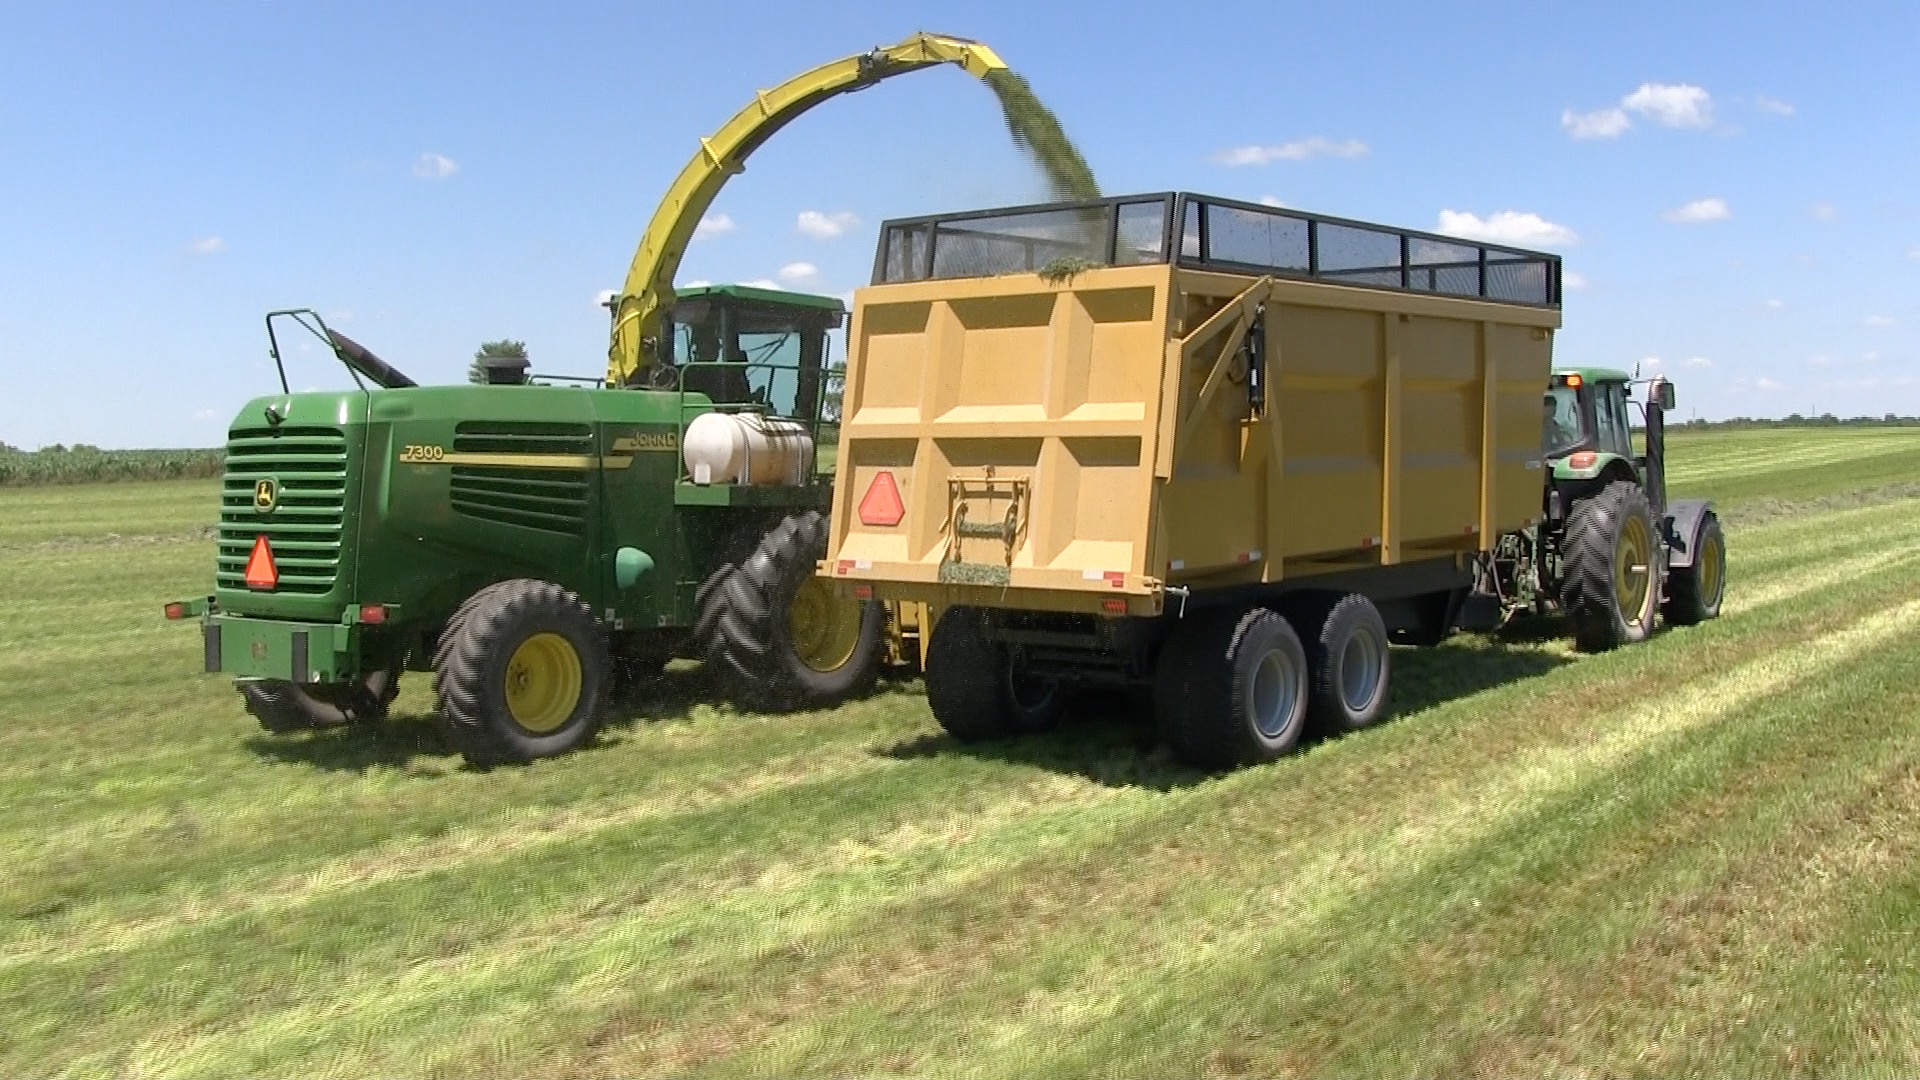 A back shot of the 20 ton dumper trailer getting hay silage loaded into it while being hauled by a tractor